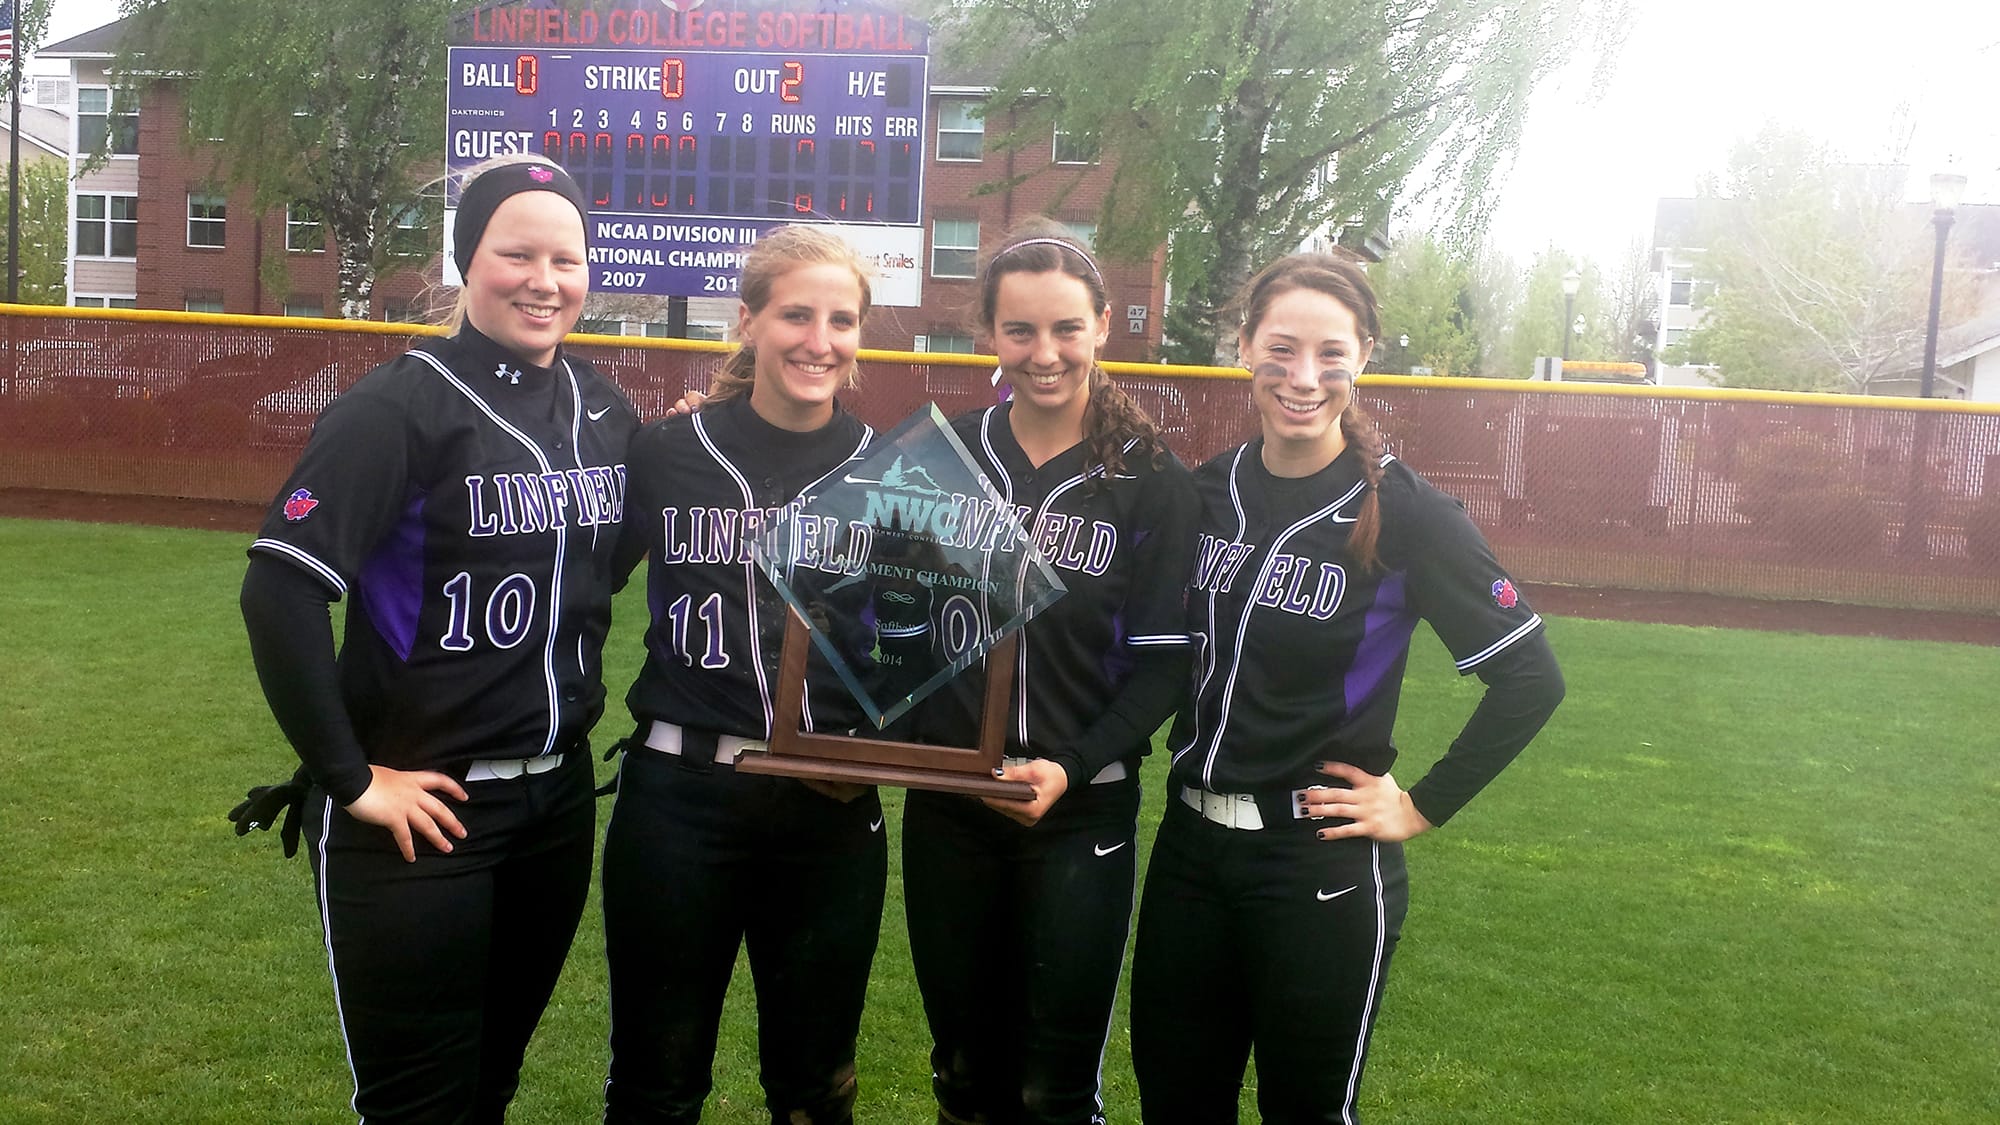 Linfield College softball players Erin Tauscher (Camas), Erin Carson (Camas), Grace Middelstadt (Prairie) and McKenna Spieth (Union), from left, with the 2014 Northwest Conference tournament championship trophy.